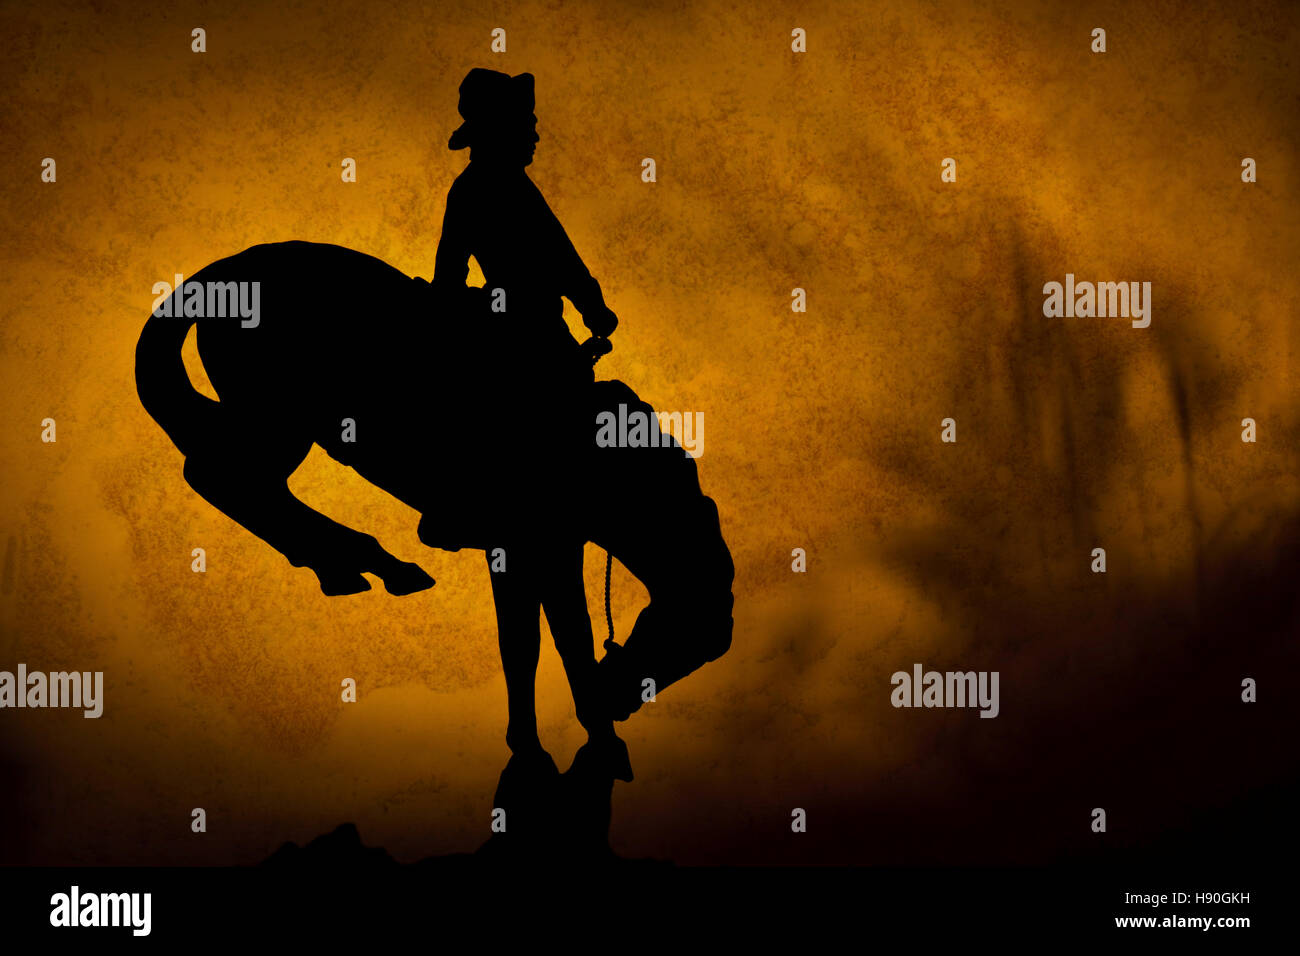 Silhouette of cowboy on a bucking bronco. orange yellow sunset background with shadows of prairie grass. Stock Photo